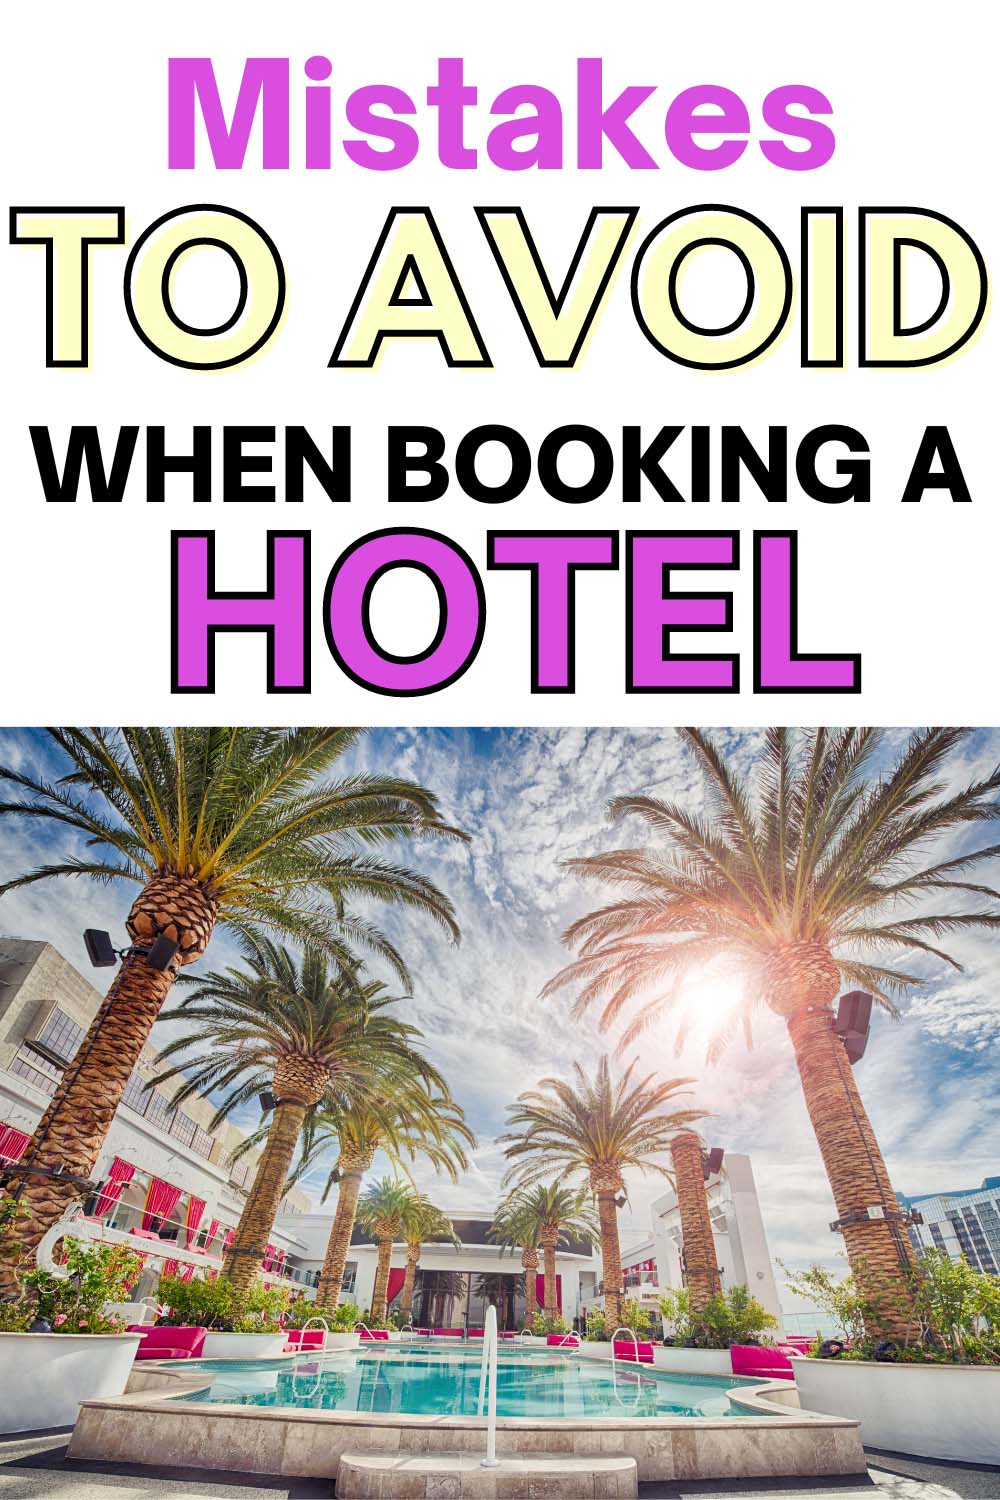 Mistakes to Avoid When Booking a Hotel